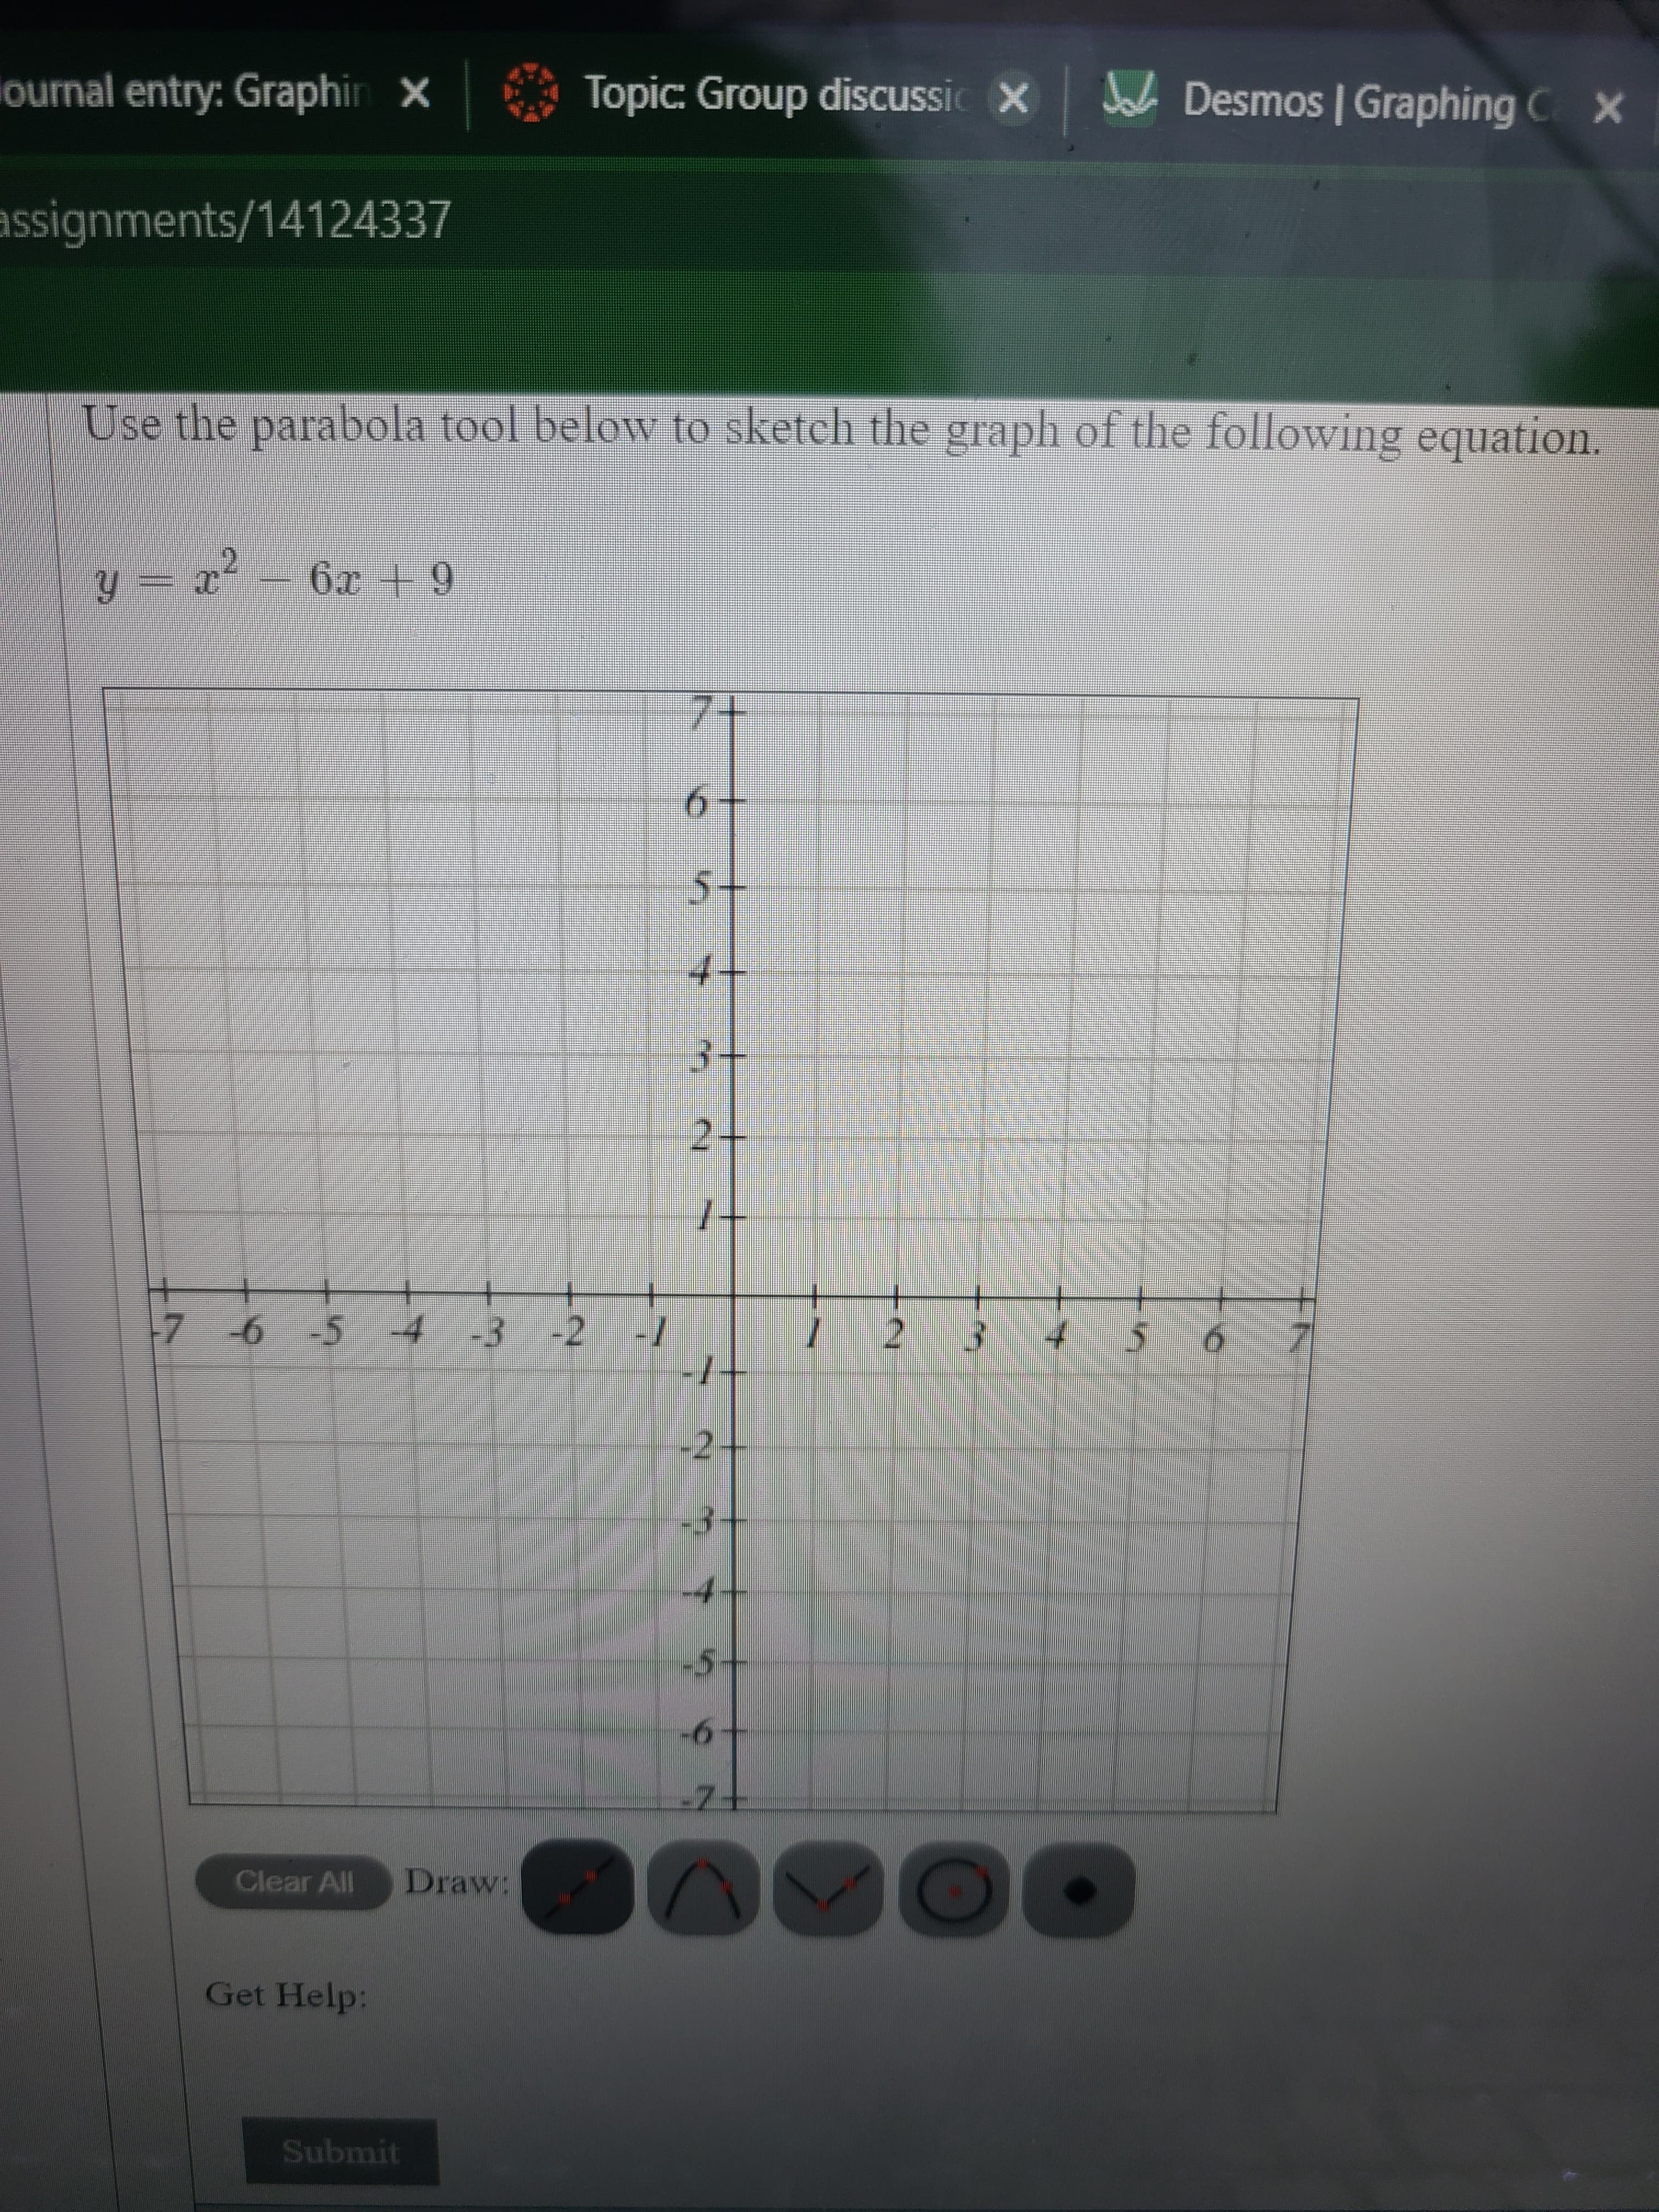 J Desmos | Graphing CX
Topic: Group discussic X
ournal entry: Graphin X
assignments/14124337
Use the parabola tool below to sketch the graph of the following equation.
y = x² = 6x +9
T = fĥ
7+
9.
s+
4-
3+
2.
+
7 -6 -5 4 -3 -2
2.
-
-2
-3
4.
Clear All
Draw:
Get Help:
Submit
